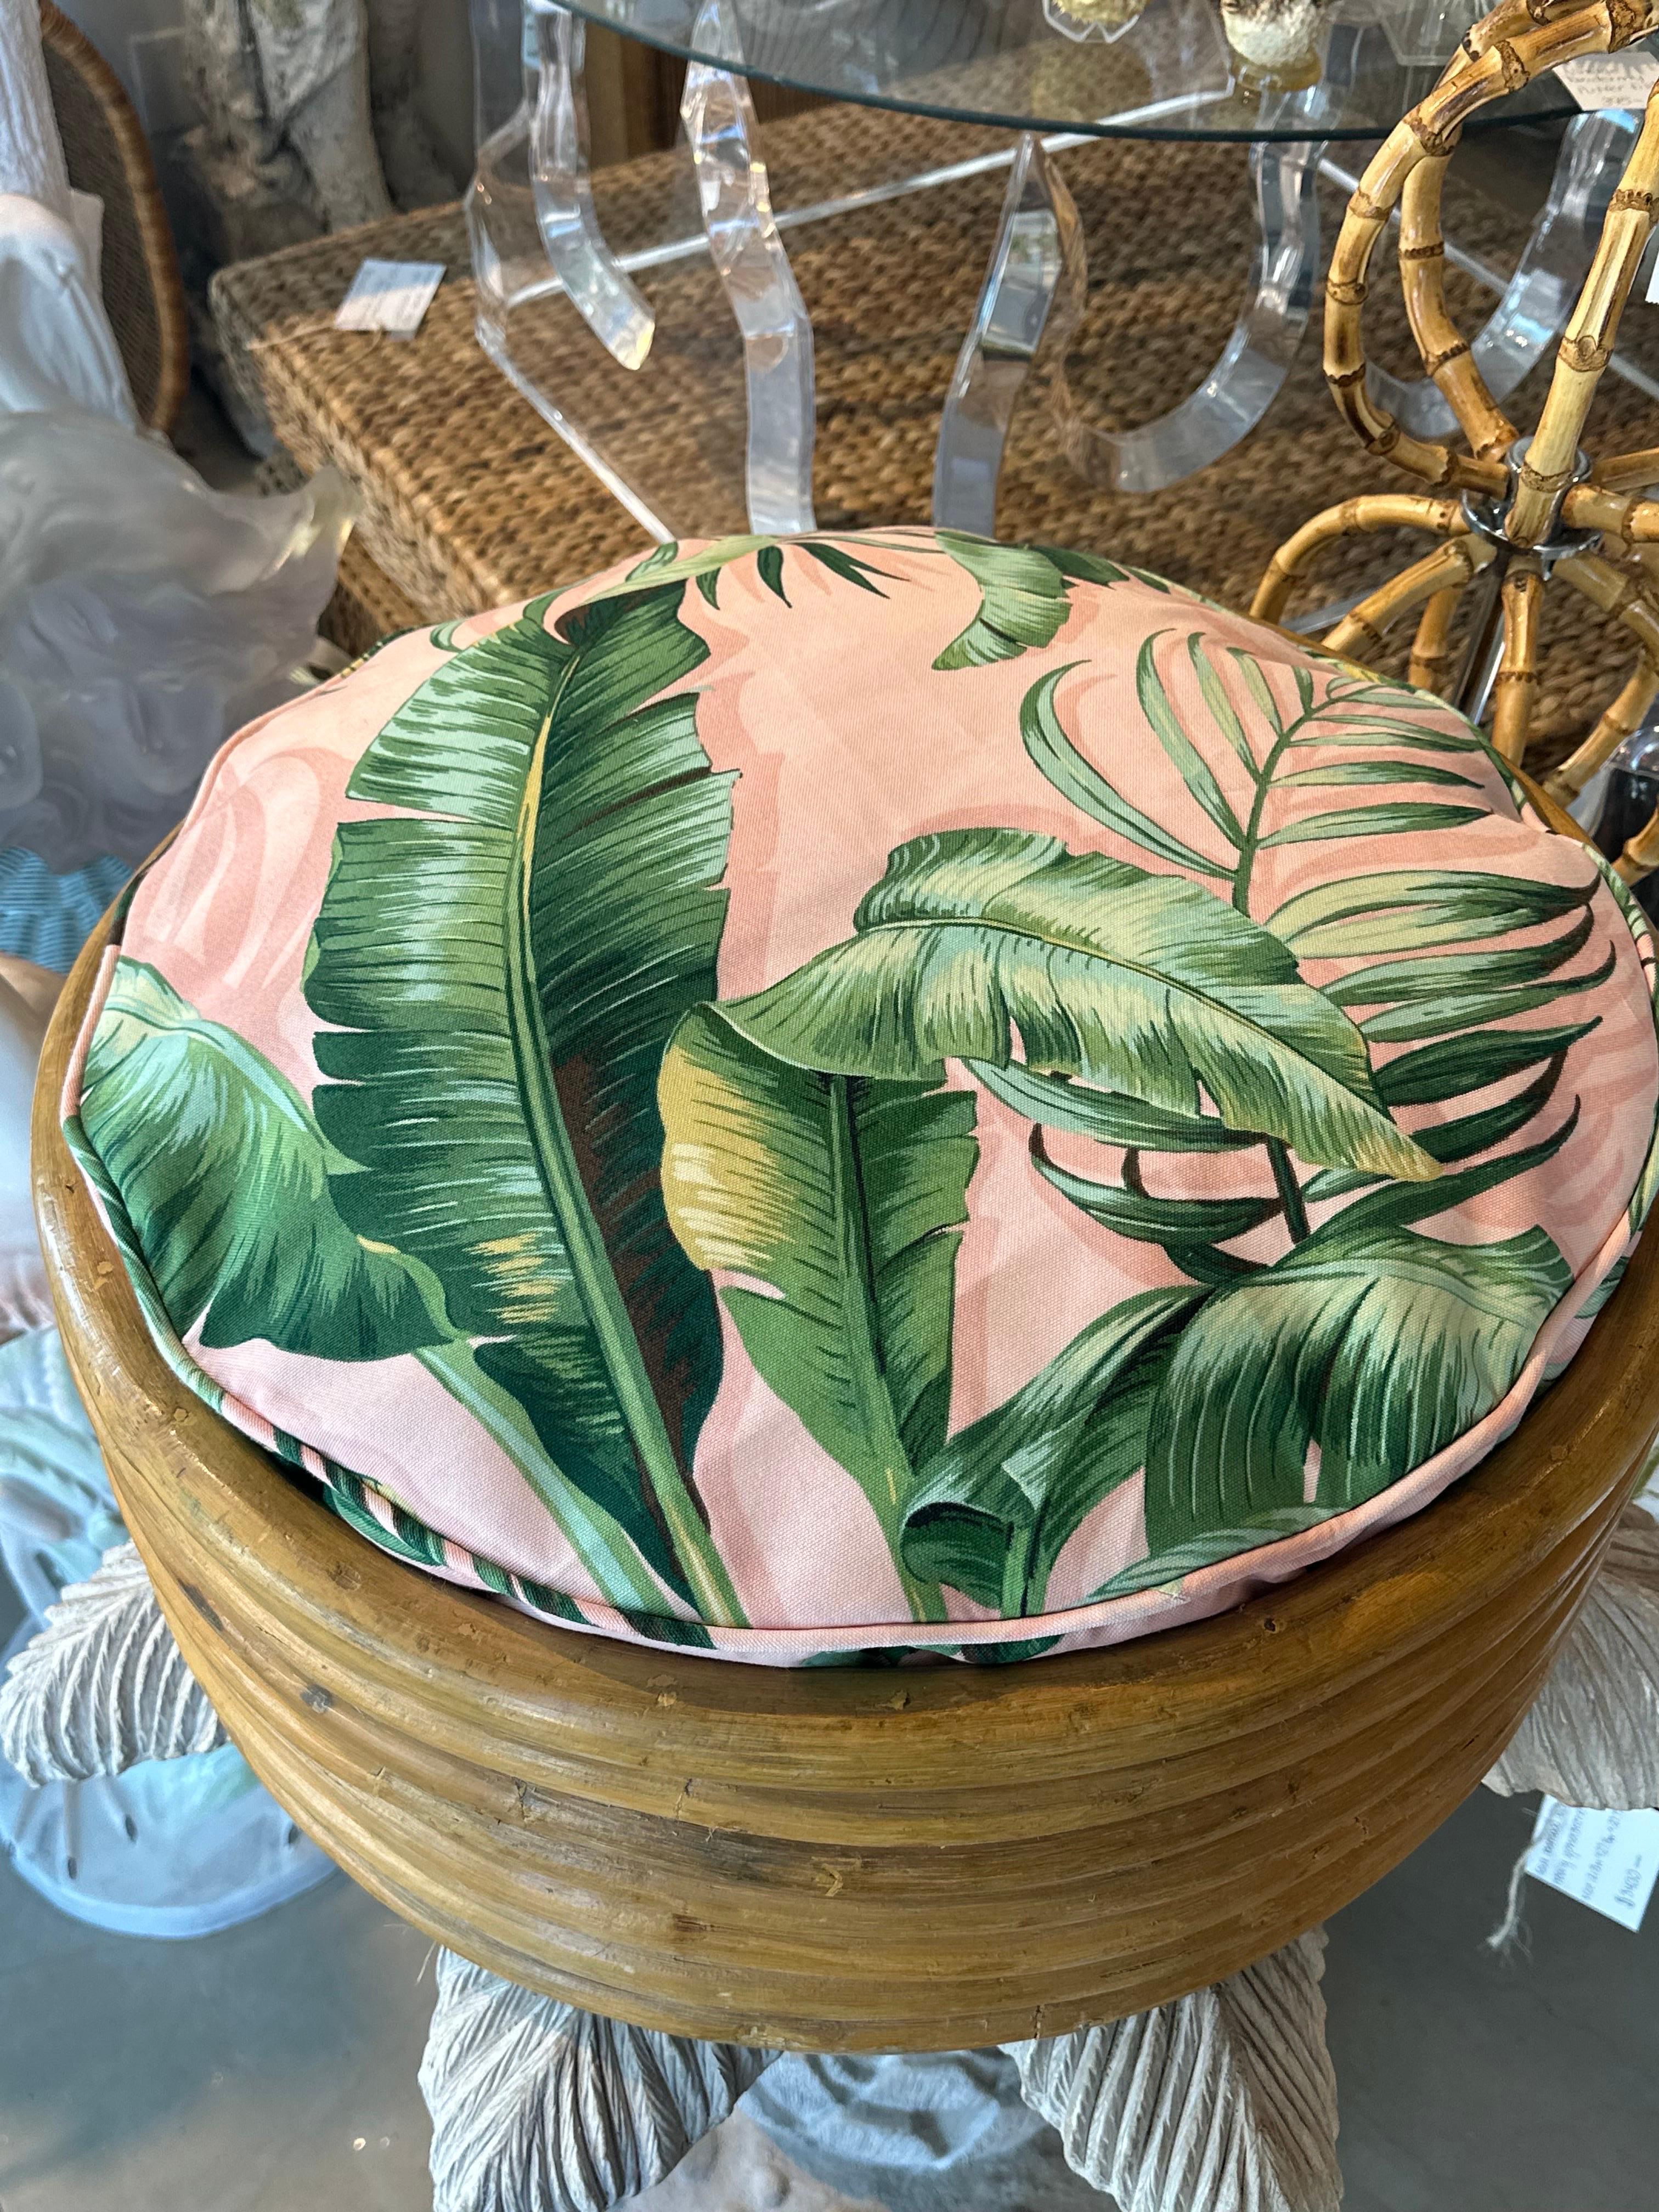 Vintage Rattan Tropical Palm Leaf Leaves Palm Beach Dog Pet Bed New Upholstery In Good Condition For Sale In West Palm Beach, FL